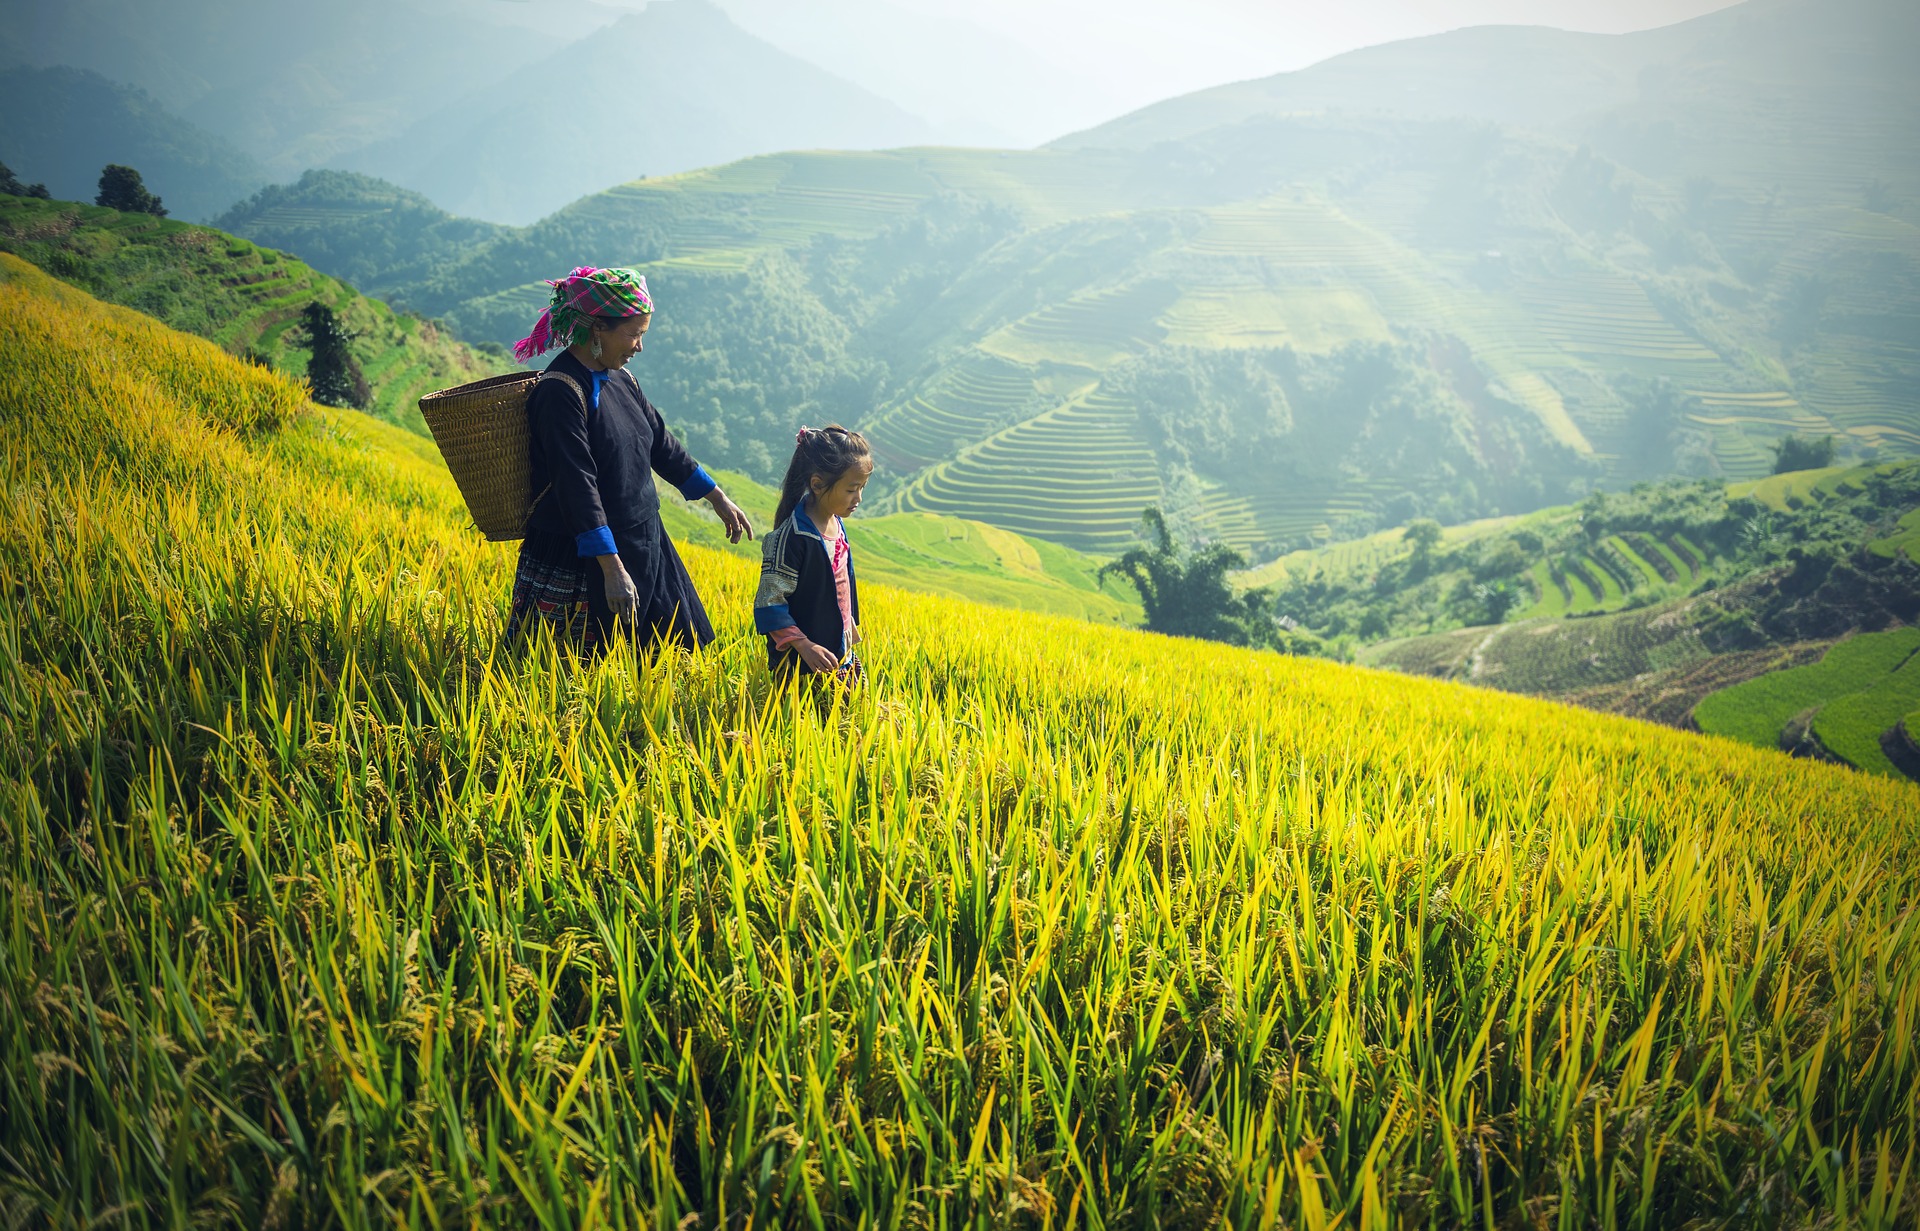 Woman with her child in the rice field photo